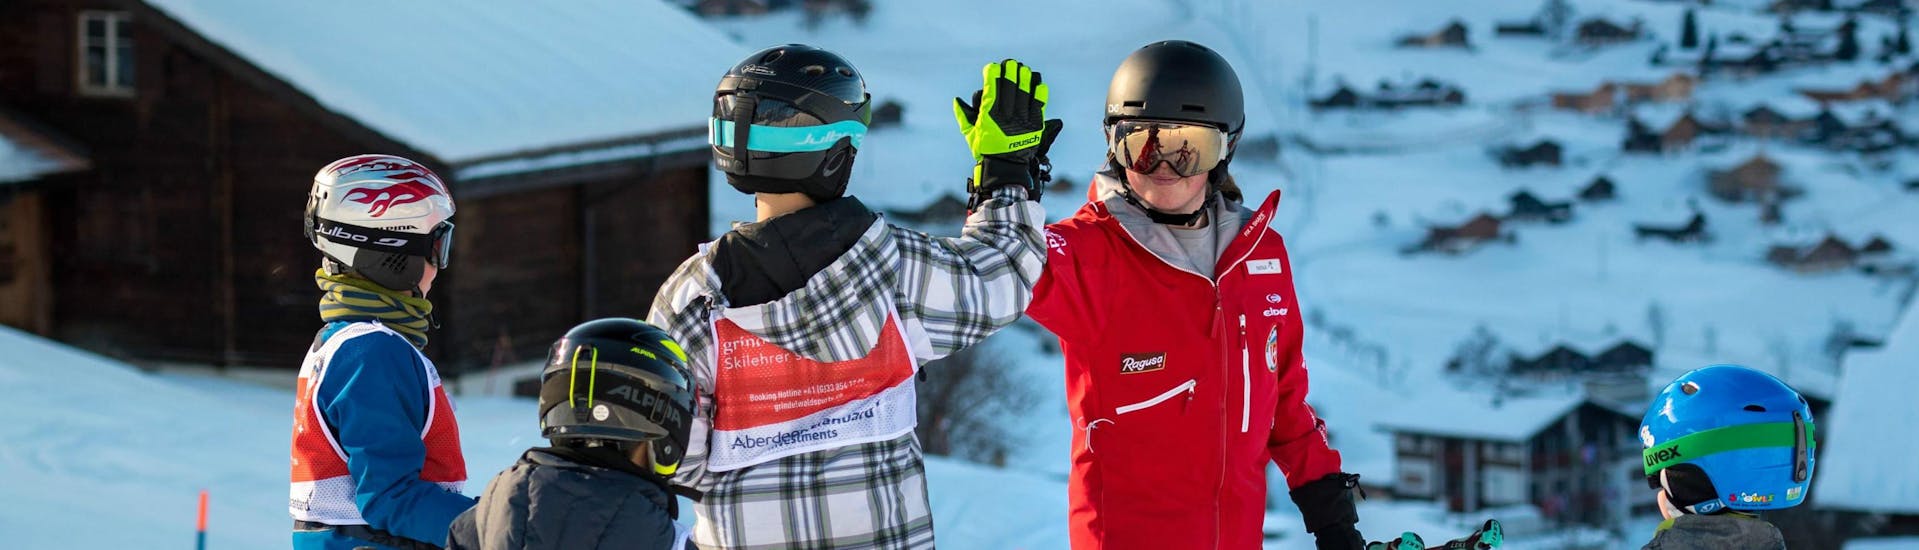 A group of skiers give their instructor a high-five during their kids ski lessons for beginners with the Grindelwald Ski School.